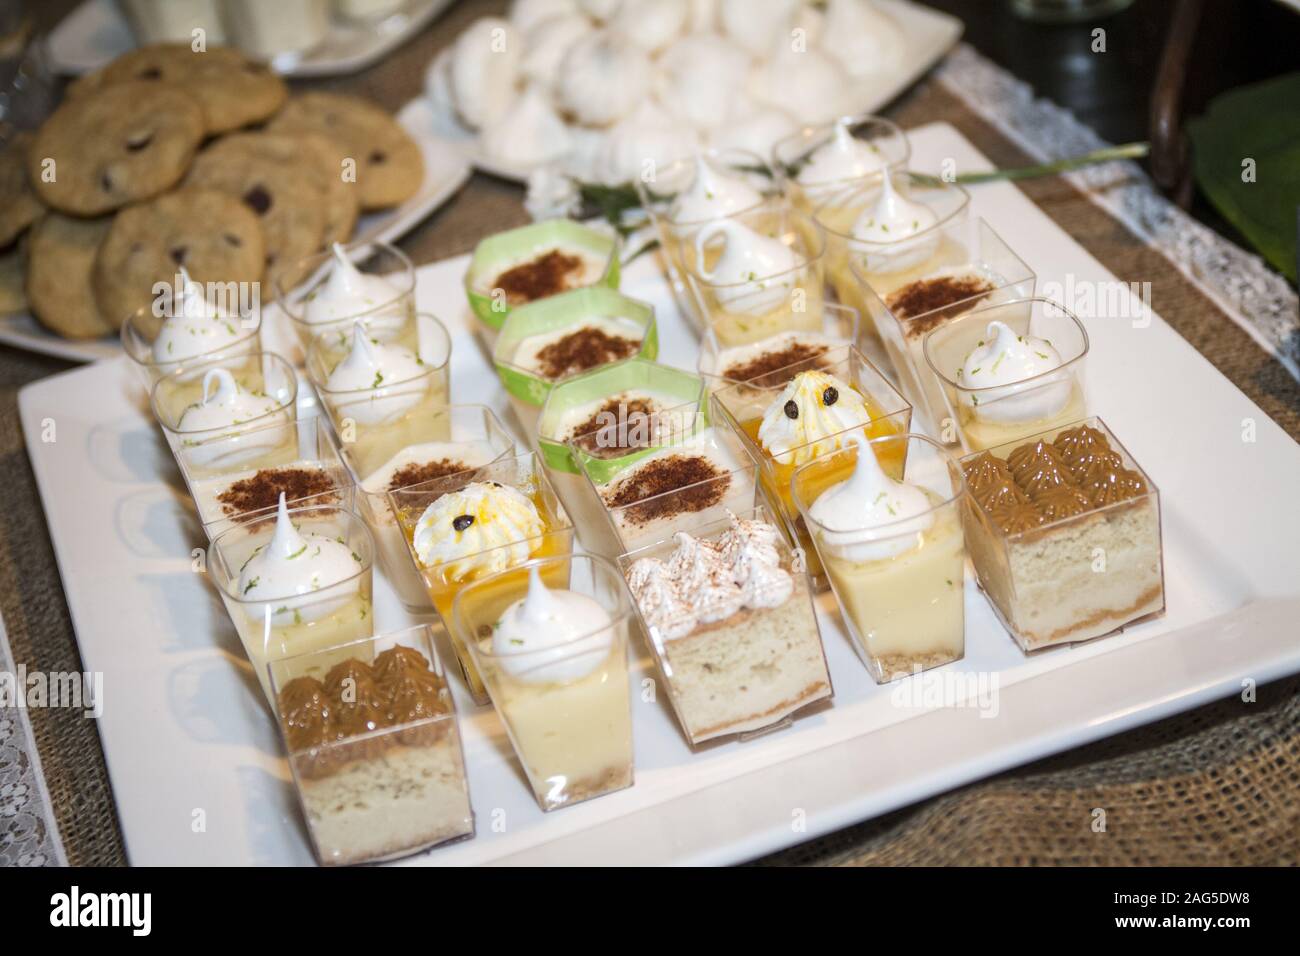 Tray of small sups of desserts with chocolate and cream garnish and some cookies Stock Photo